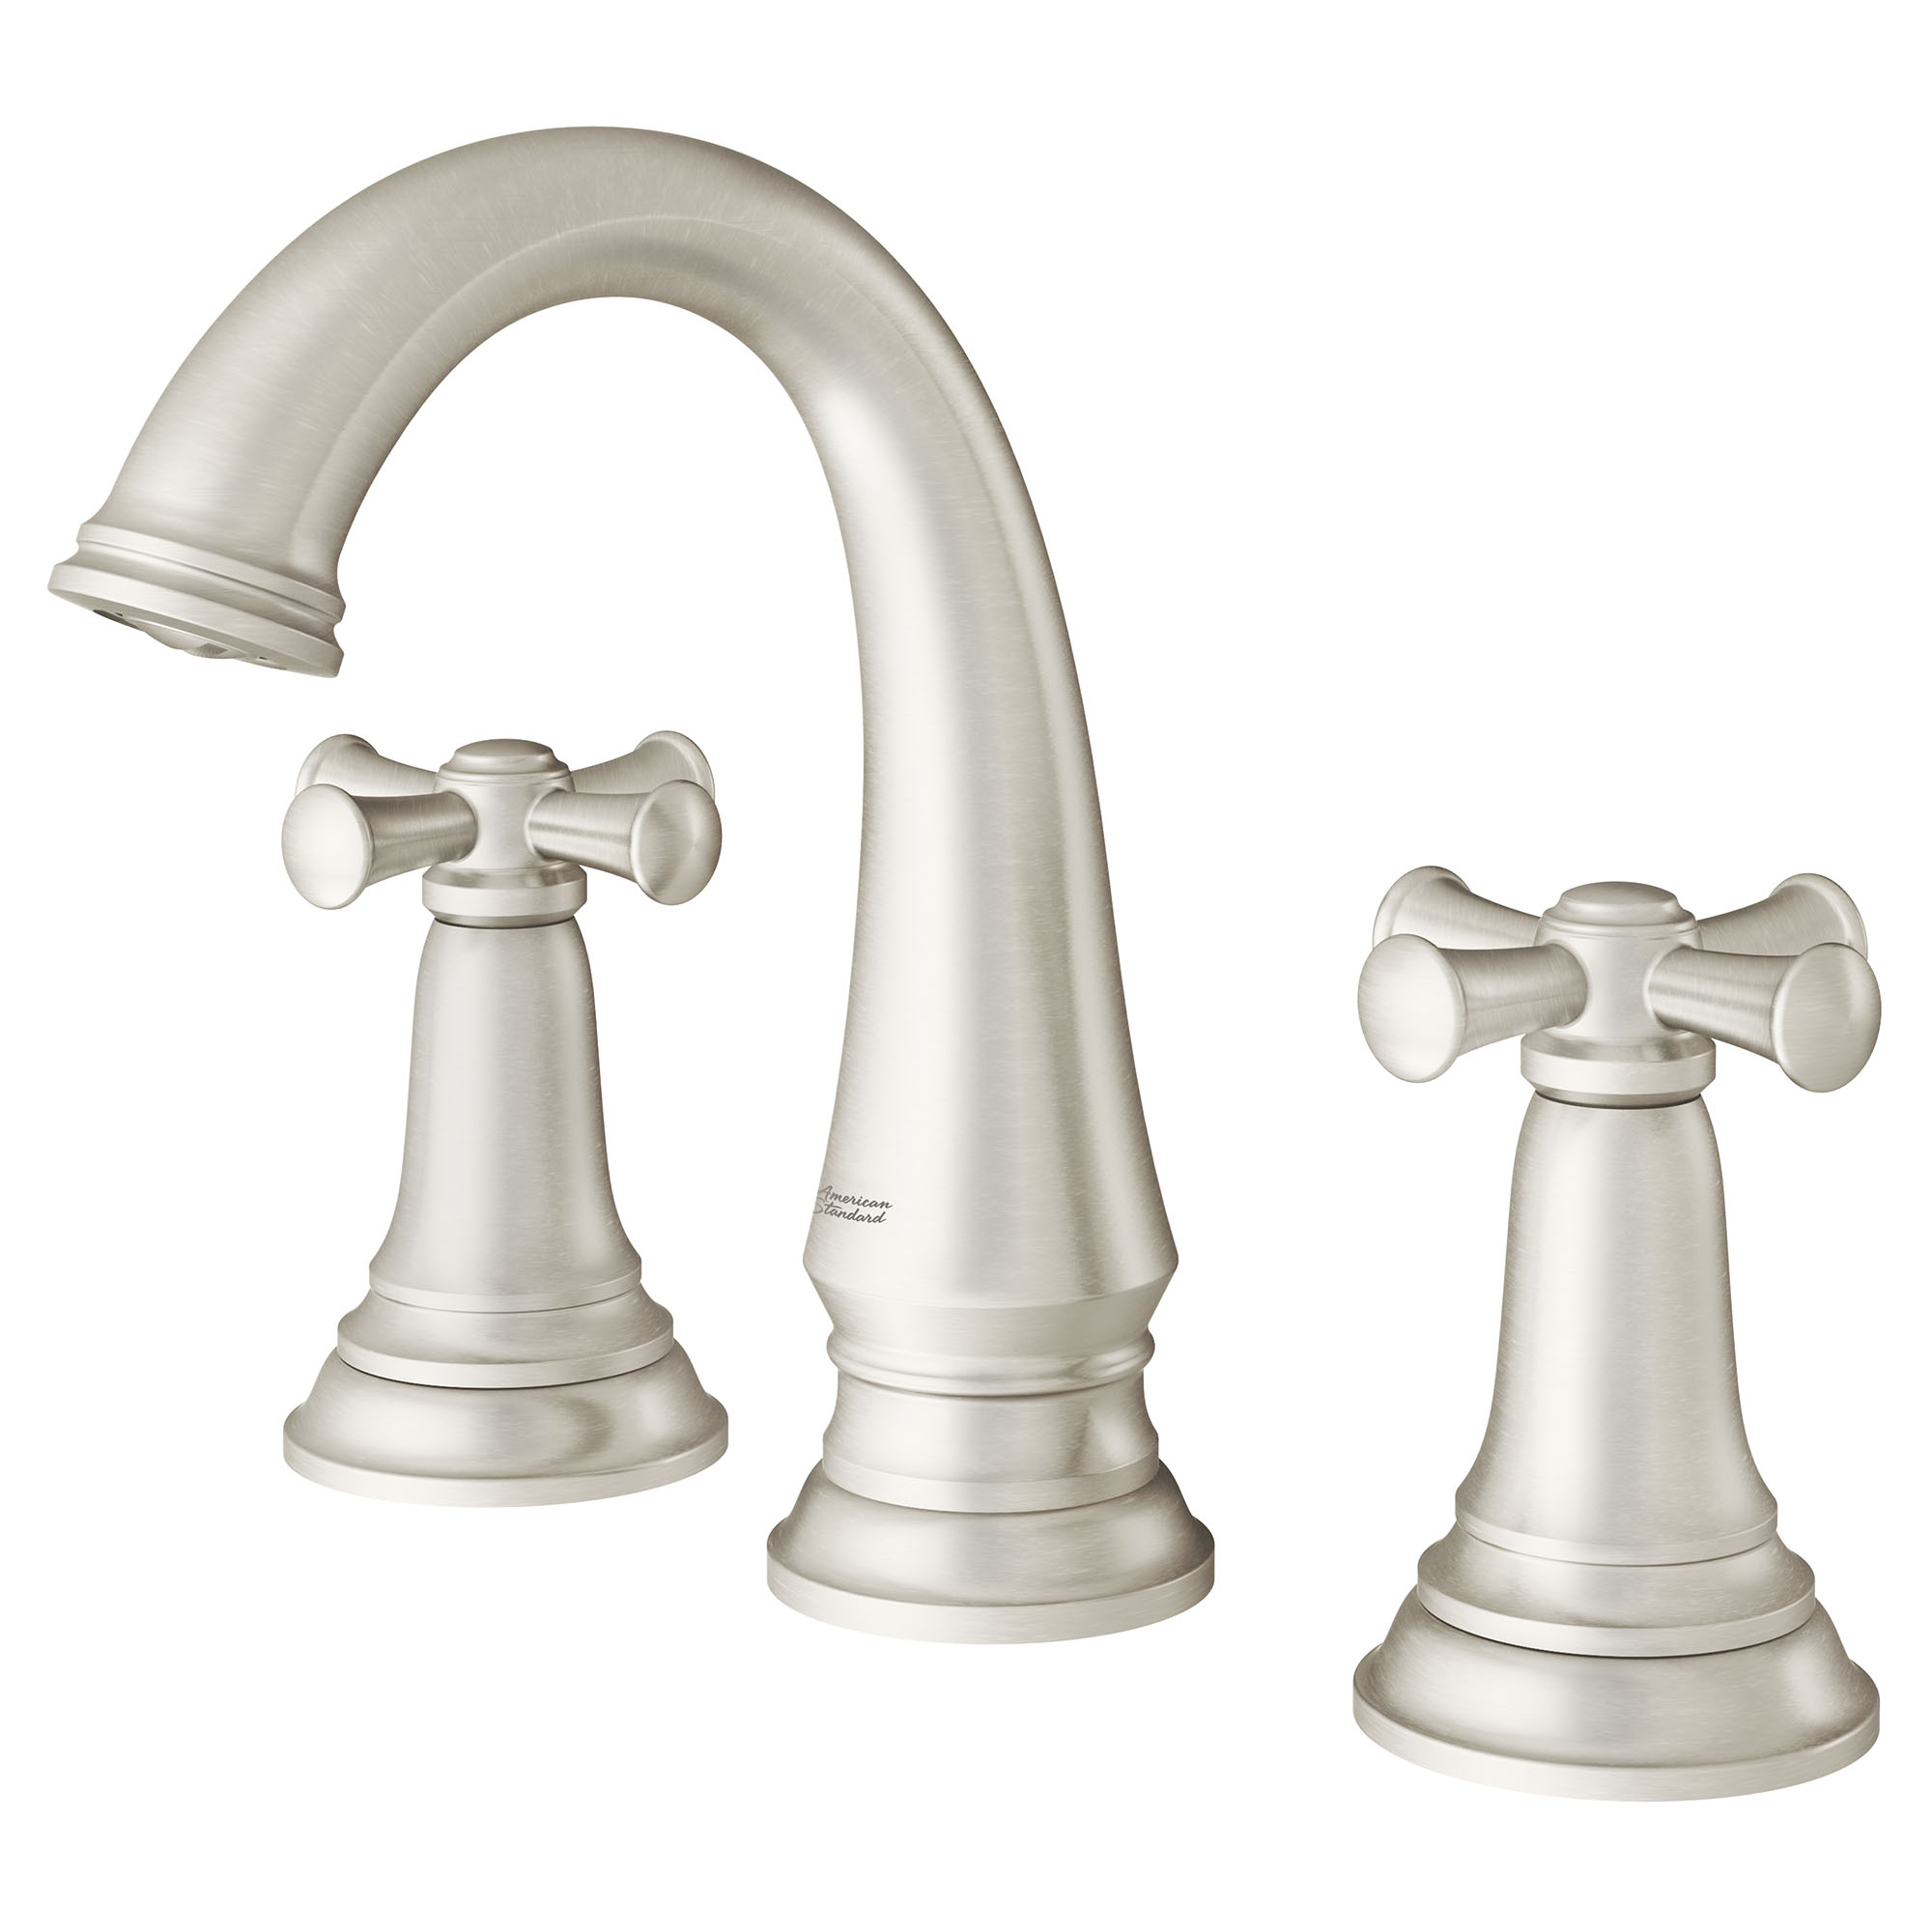 Delancey™ 8-Inch Widespread 2-Handle Bathroom Faucet 1.2 gpm/4.5 L/min With Cross Handles